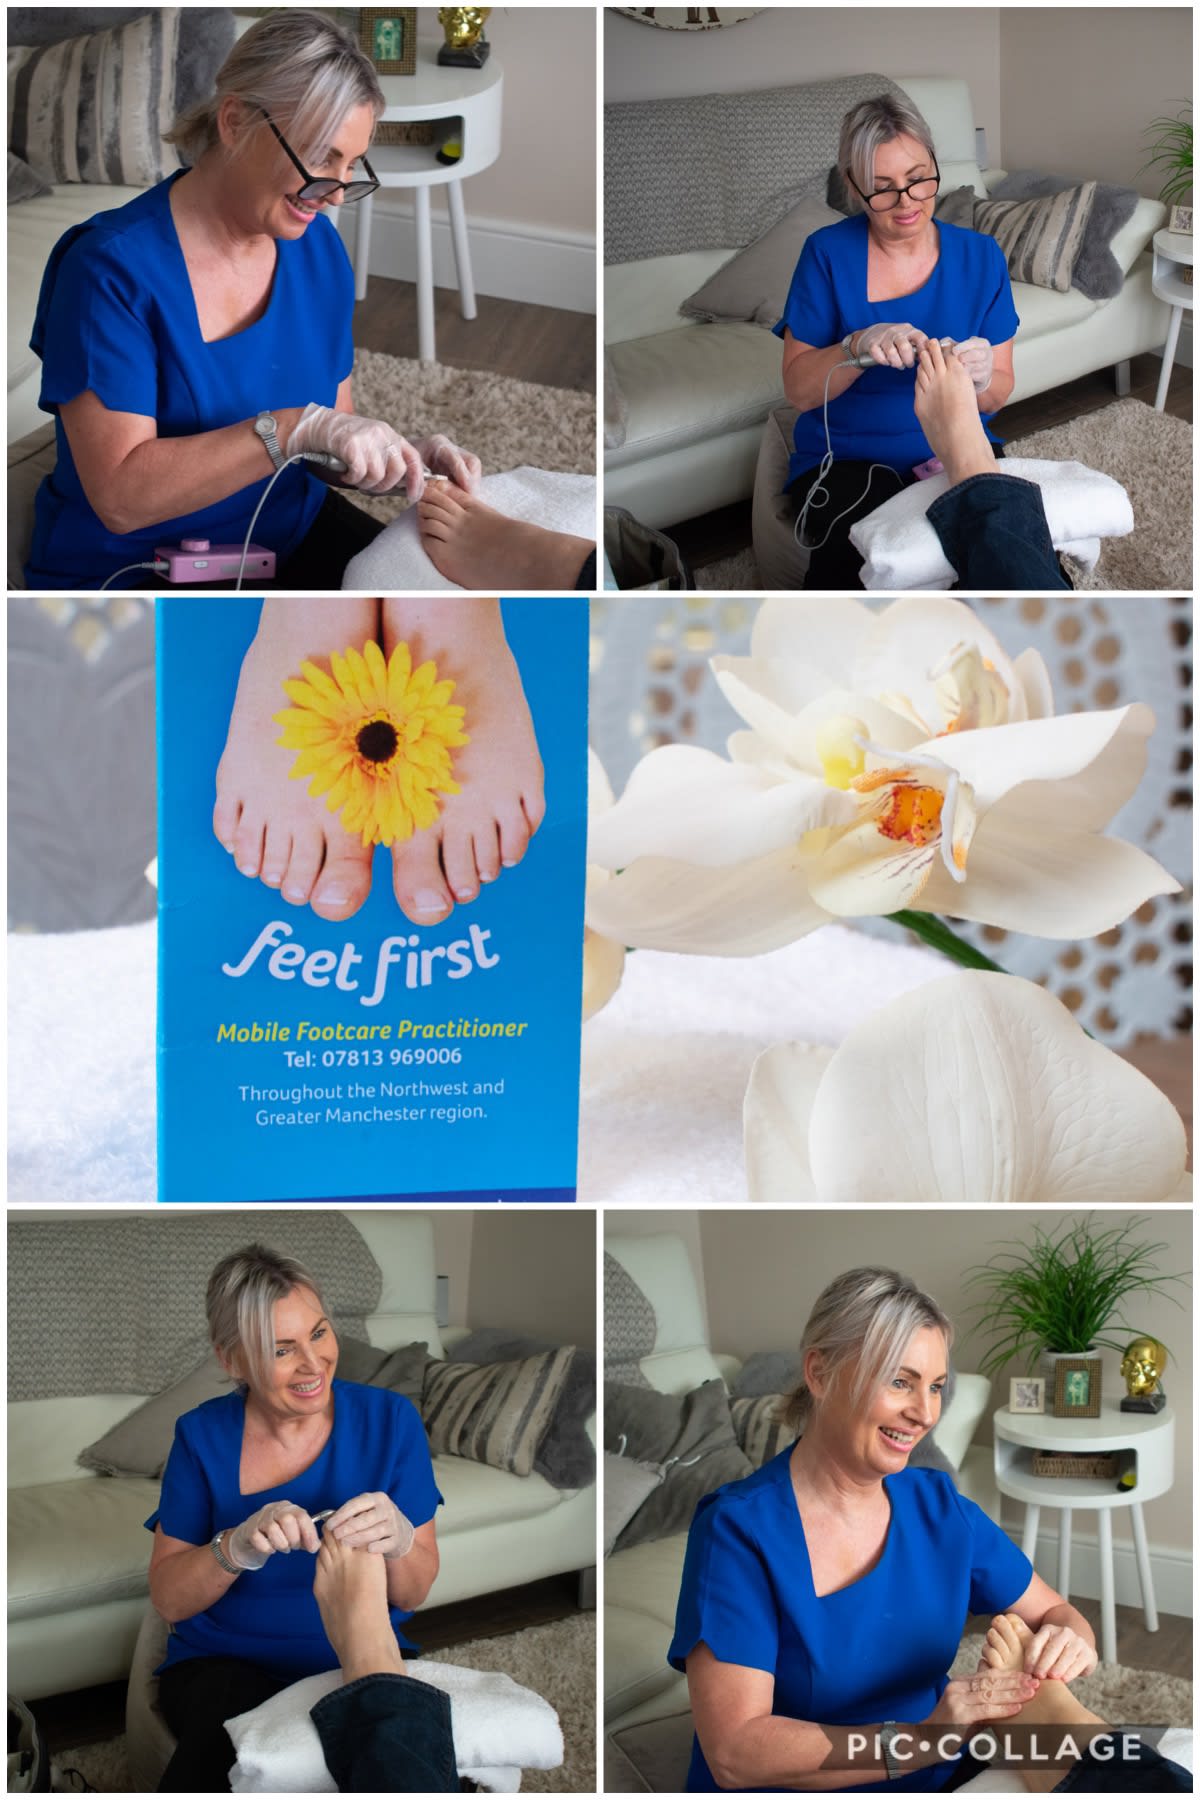 Images Feetfirst Mobile Footcare Practitioner